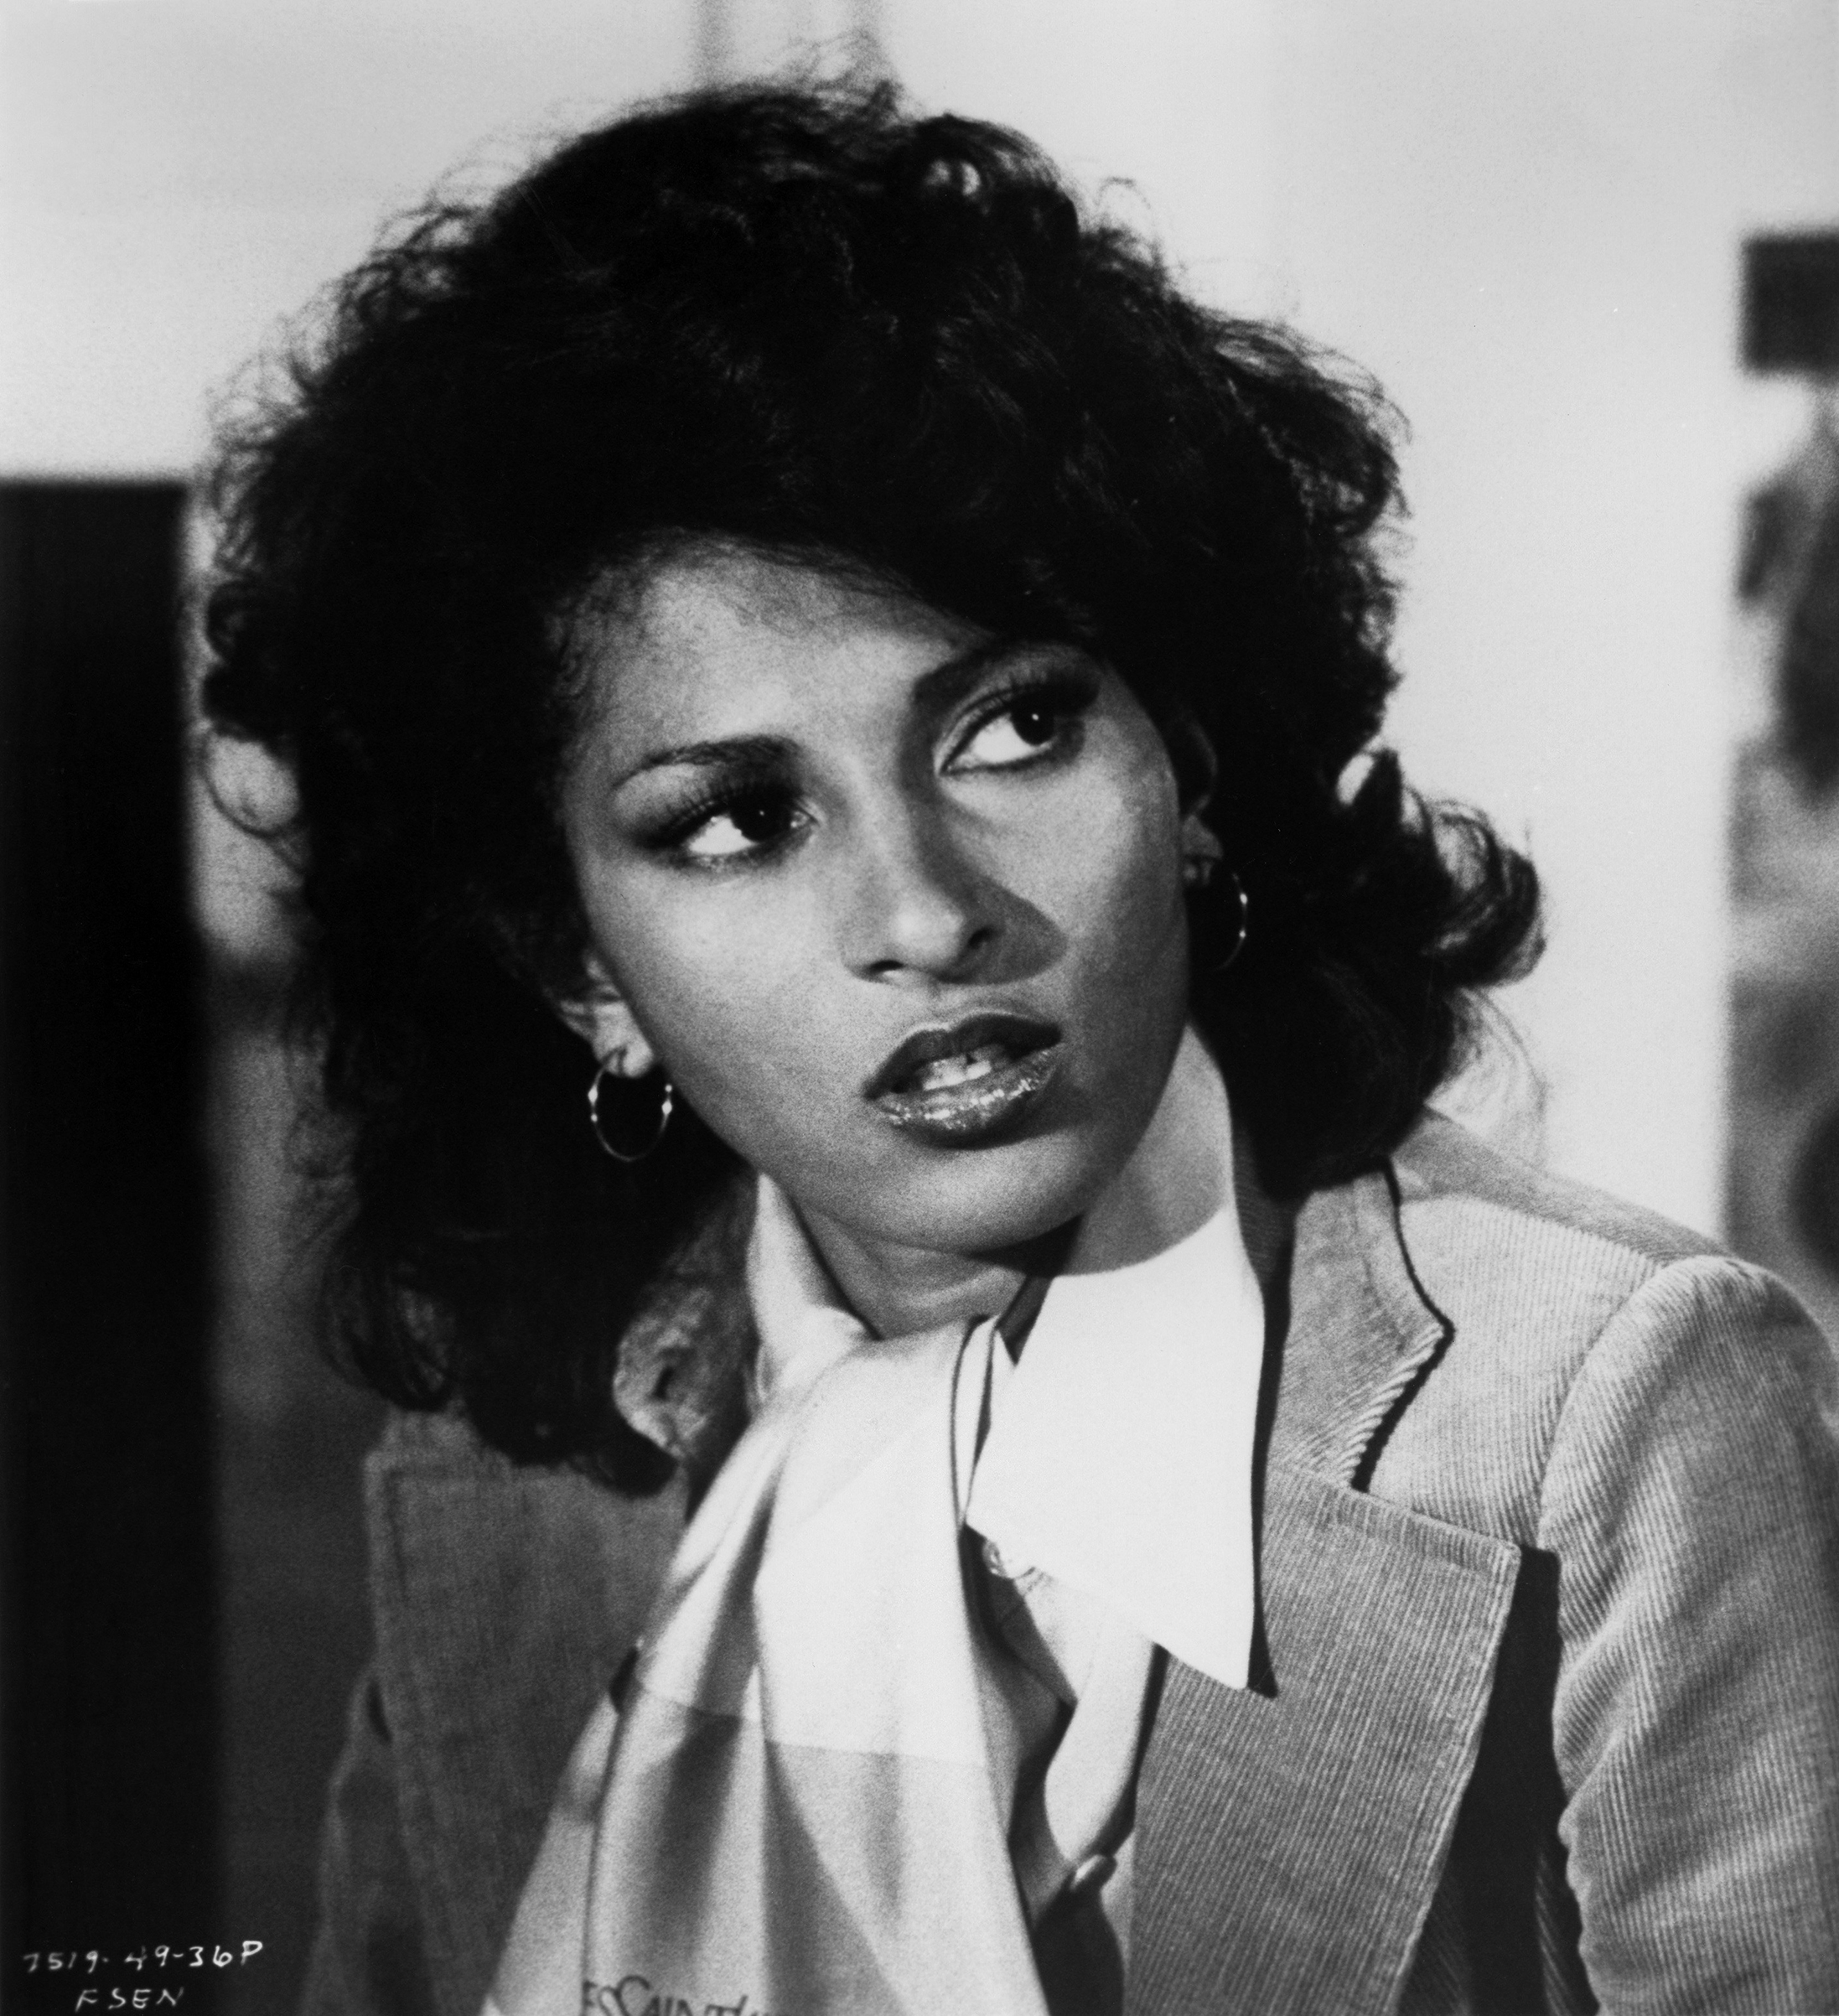 Actress Pam Grier poses for a portrait for the movie "Friday Foster" circa 1975 in Los Angeles